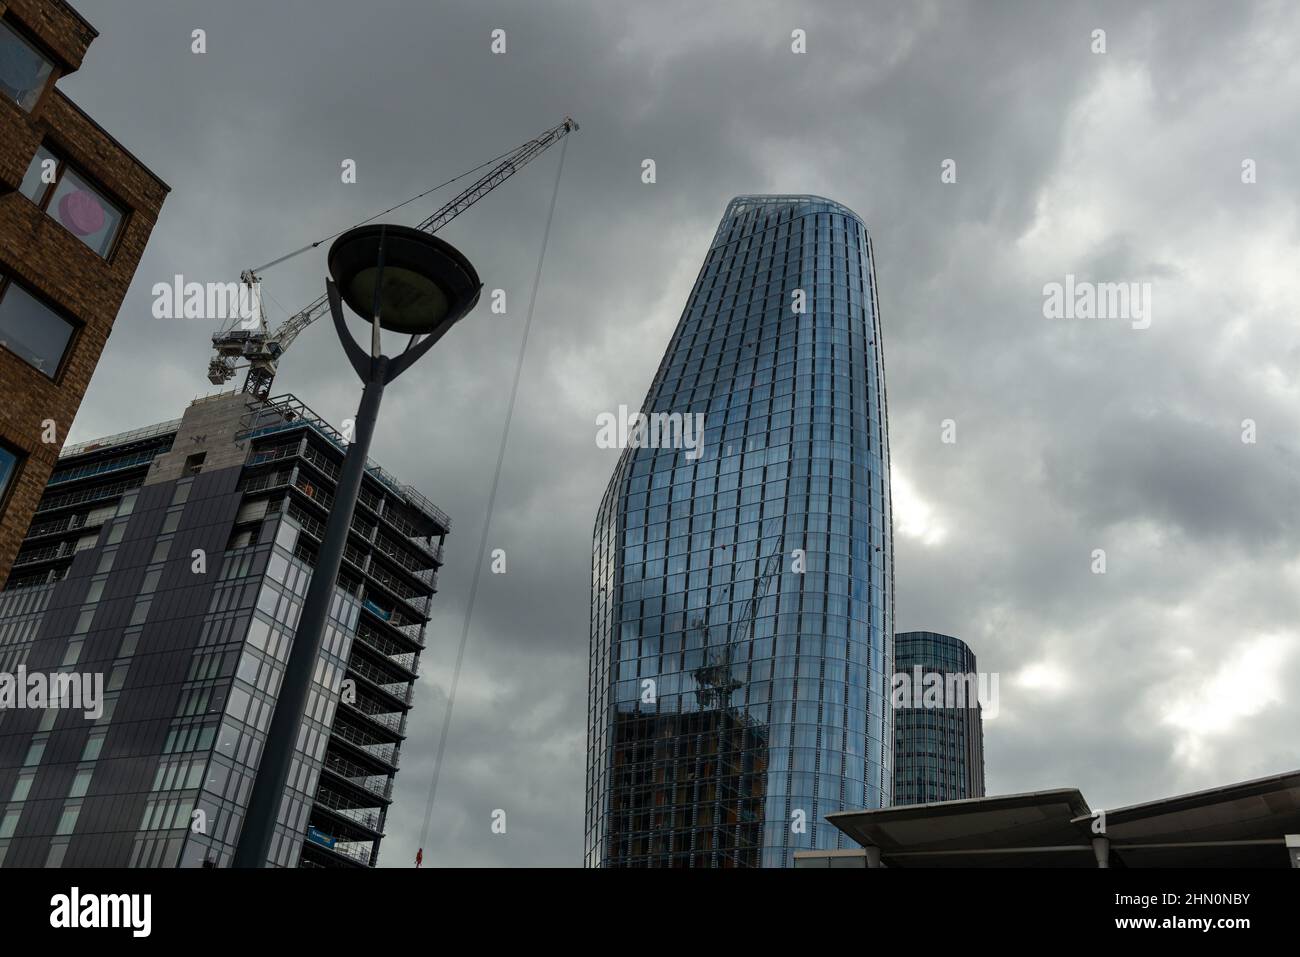 A tower crane and new building under construction reflected in the glass walls of One Blackfriars Tower in central London Stock Photo